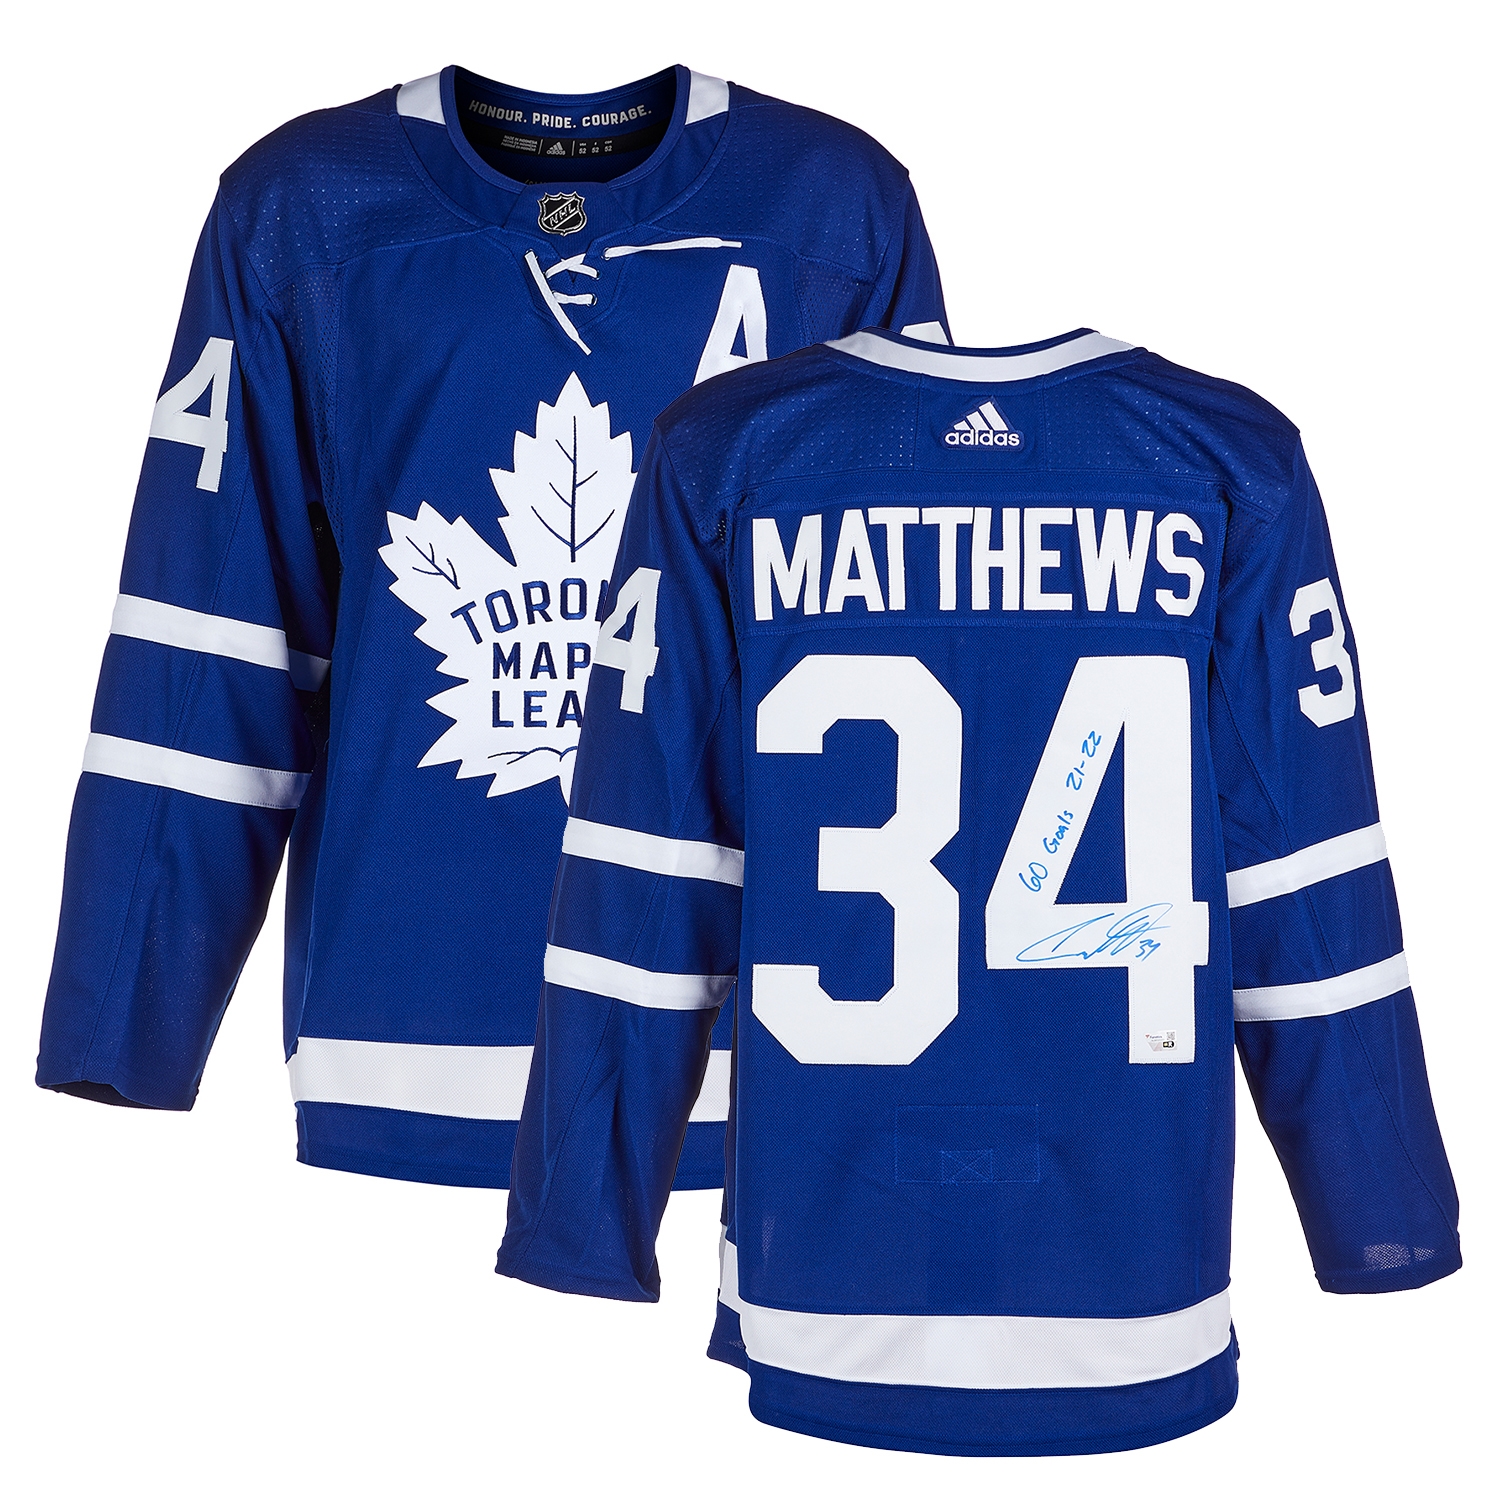 Auston Matthews Signed Toronto Maple Leafs adidas Jersey with 60 Goals Note